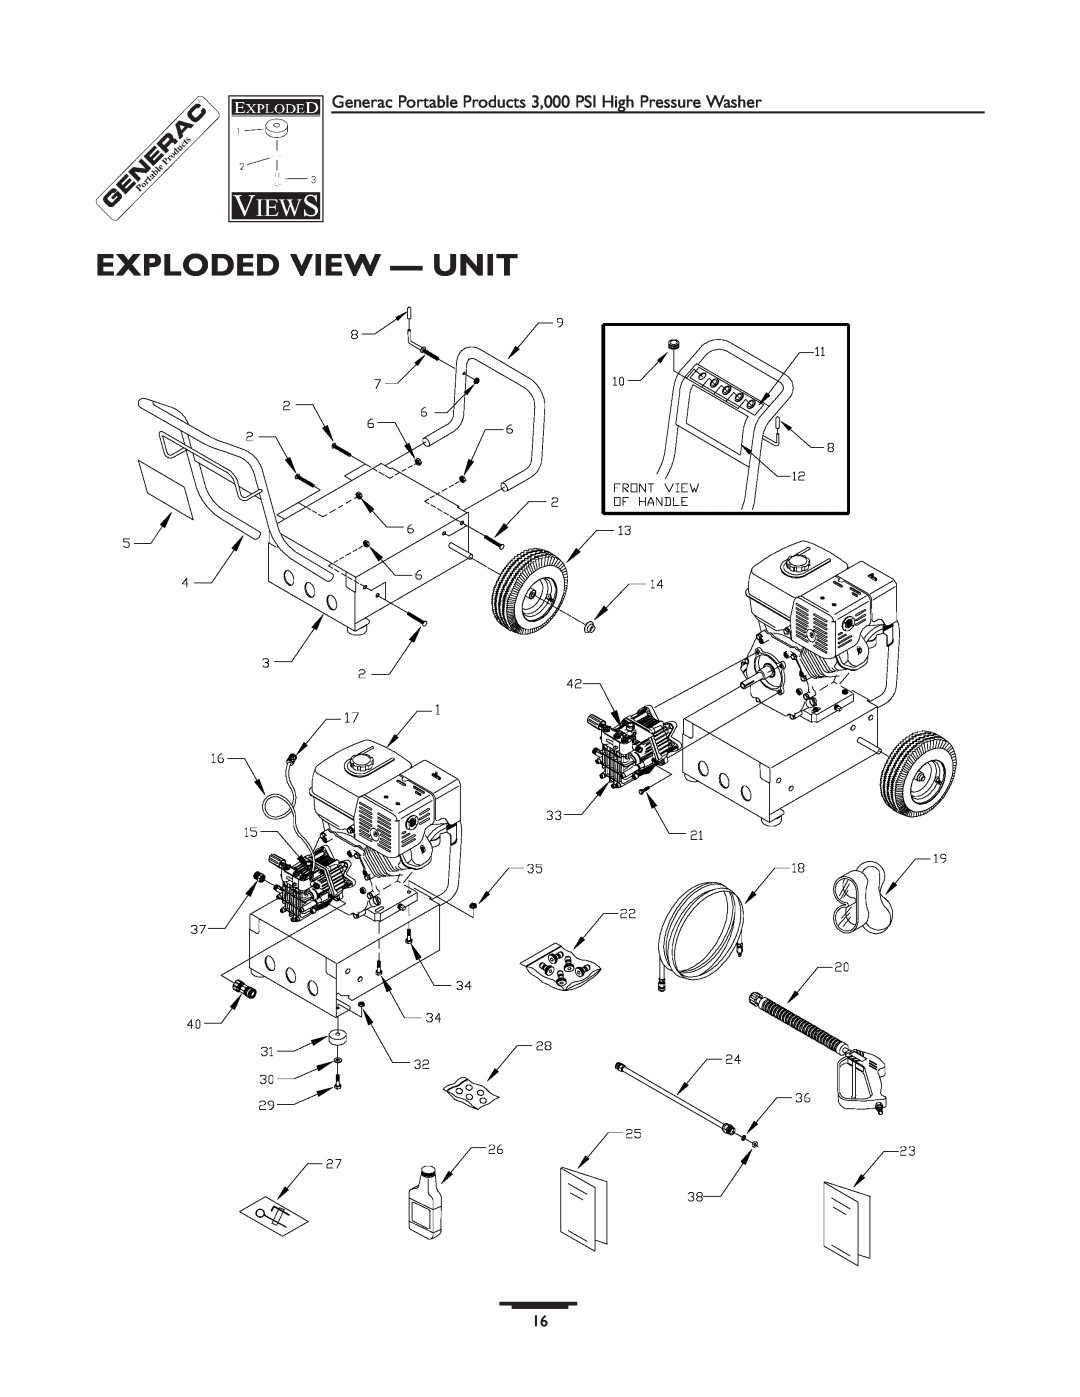 Generac 1418-0 manual Exploded View - Unit, Generac Portable Products 3,000 PSI High Pressure Washer 